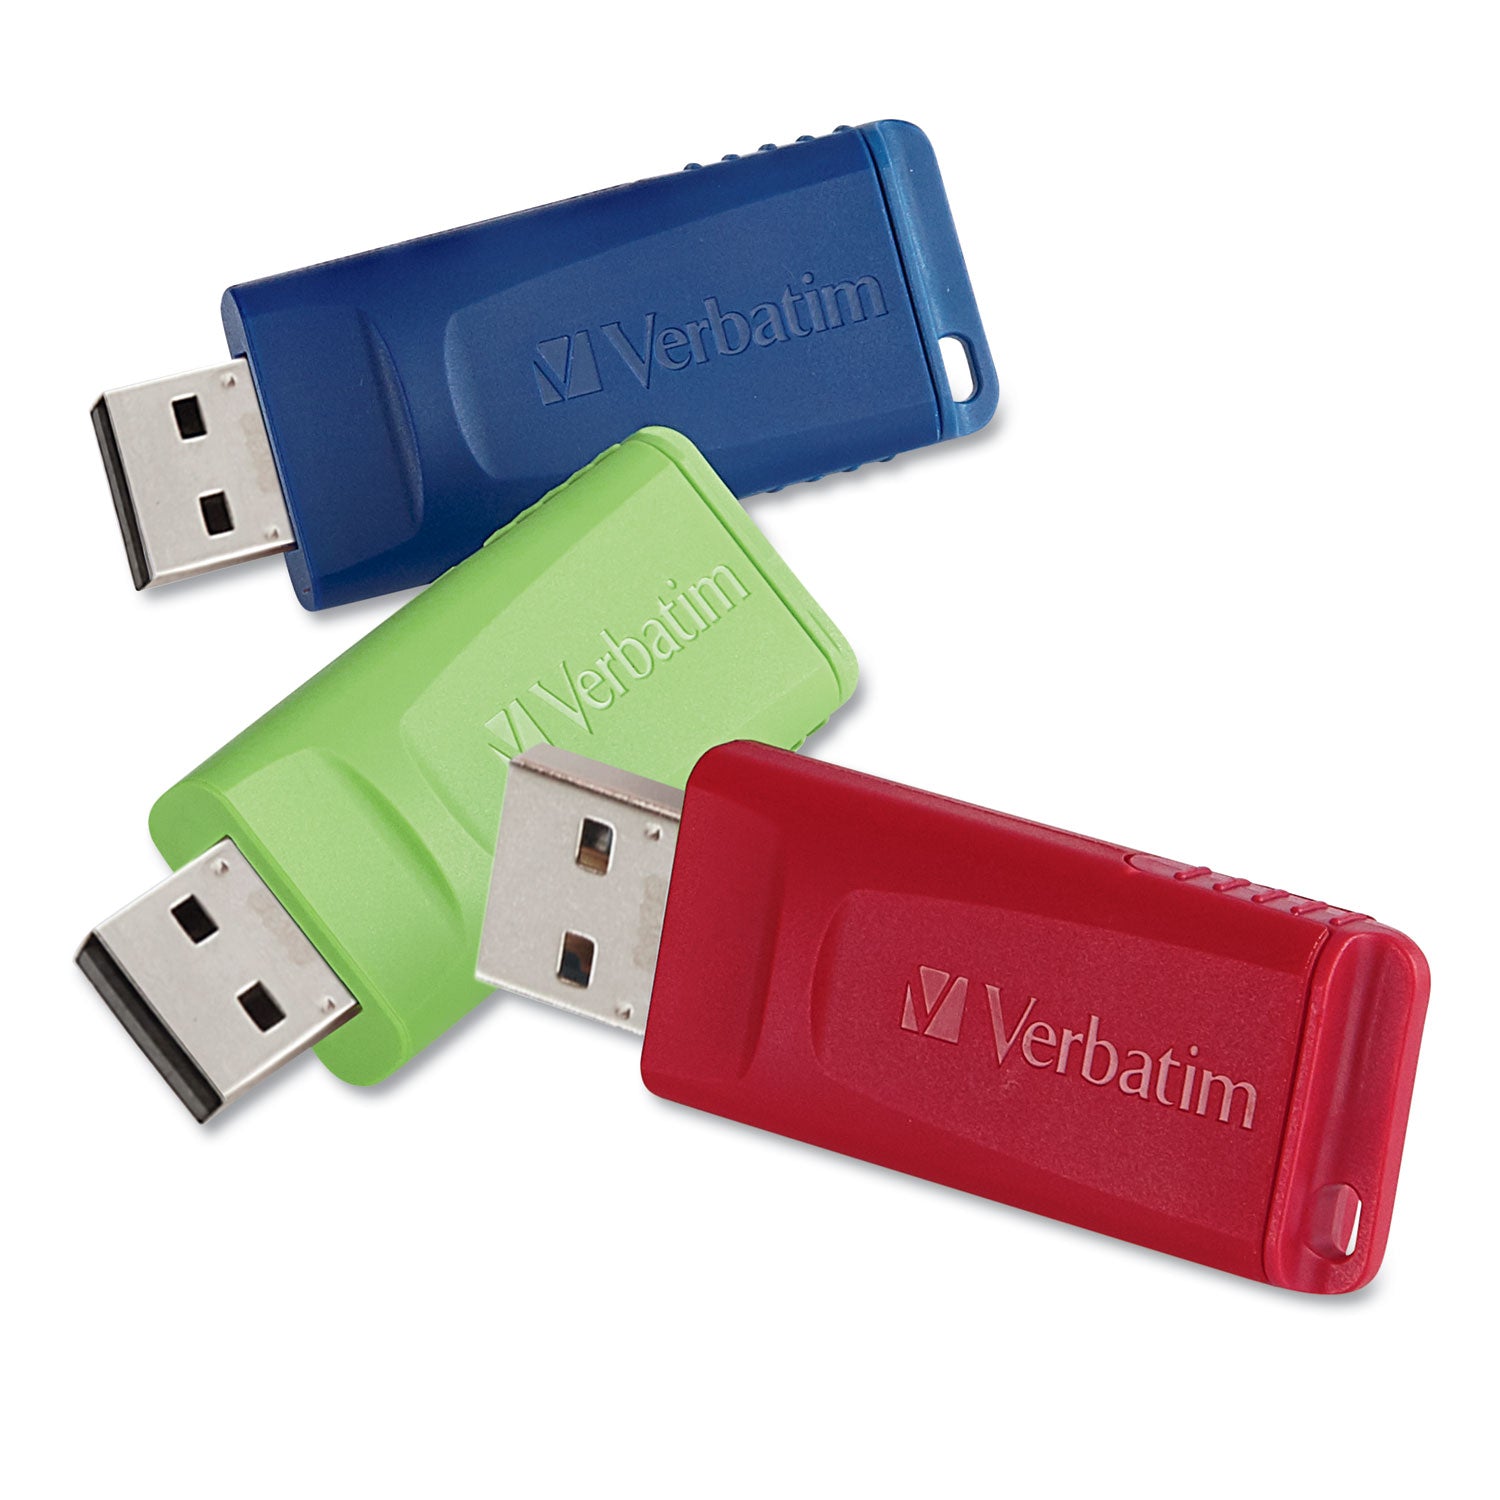 store-n-go-usb-flash-drive-32-gb-assorted-colors-3-pack_ver99811 - 1